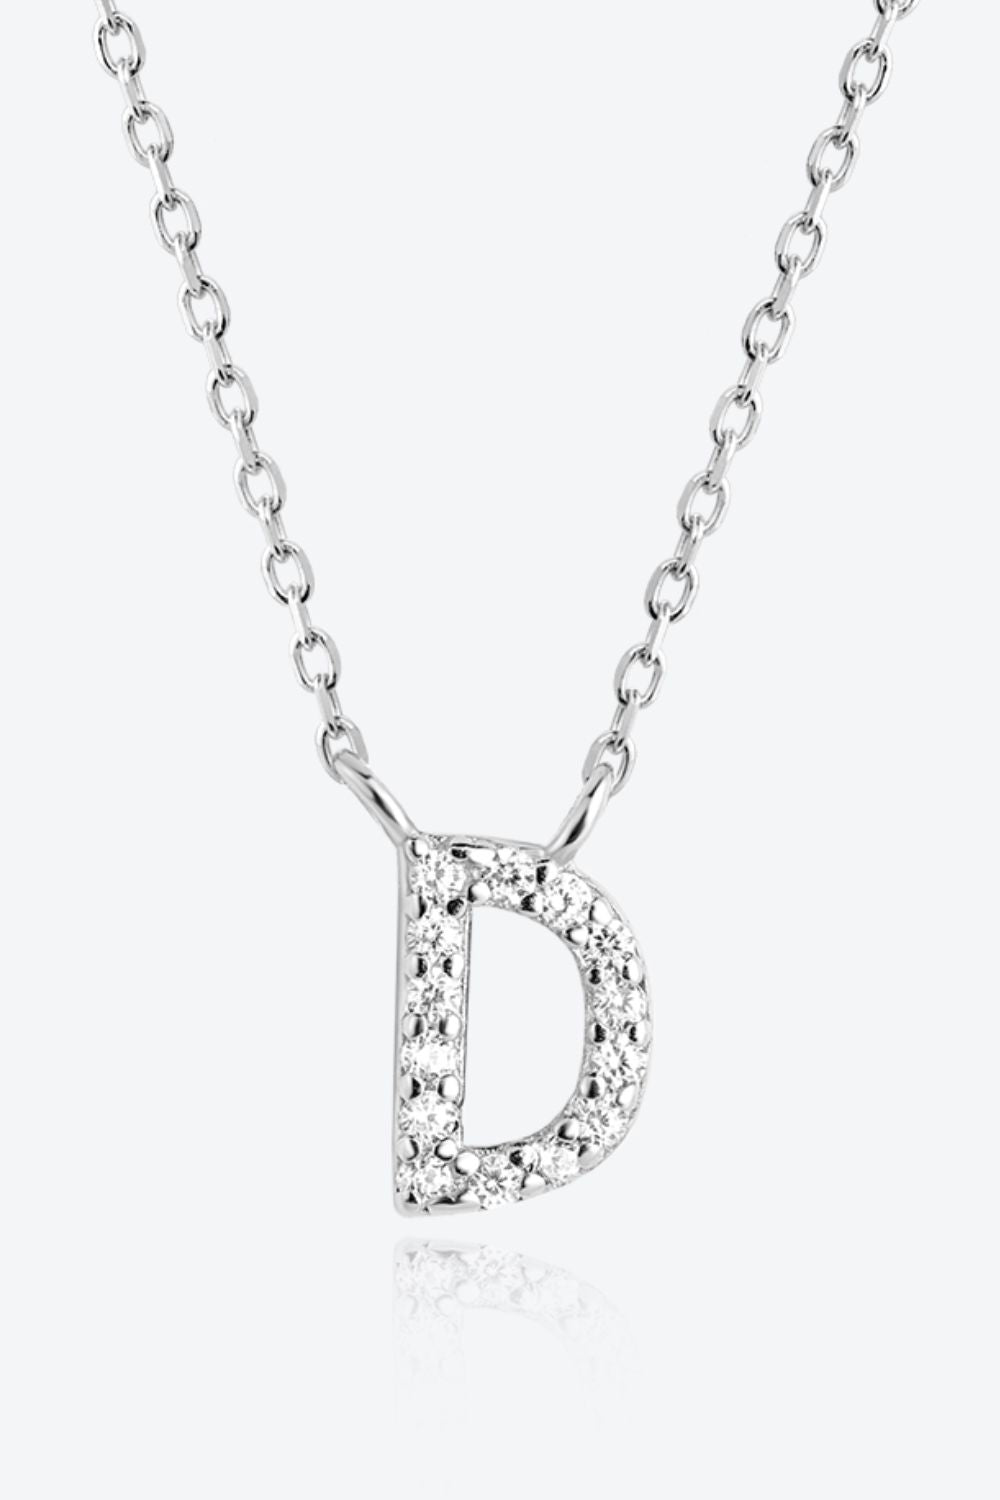 A To F Zircon 925 Sterling Silver Necklace - Uylee's Boutique